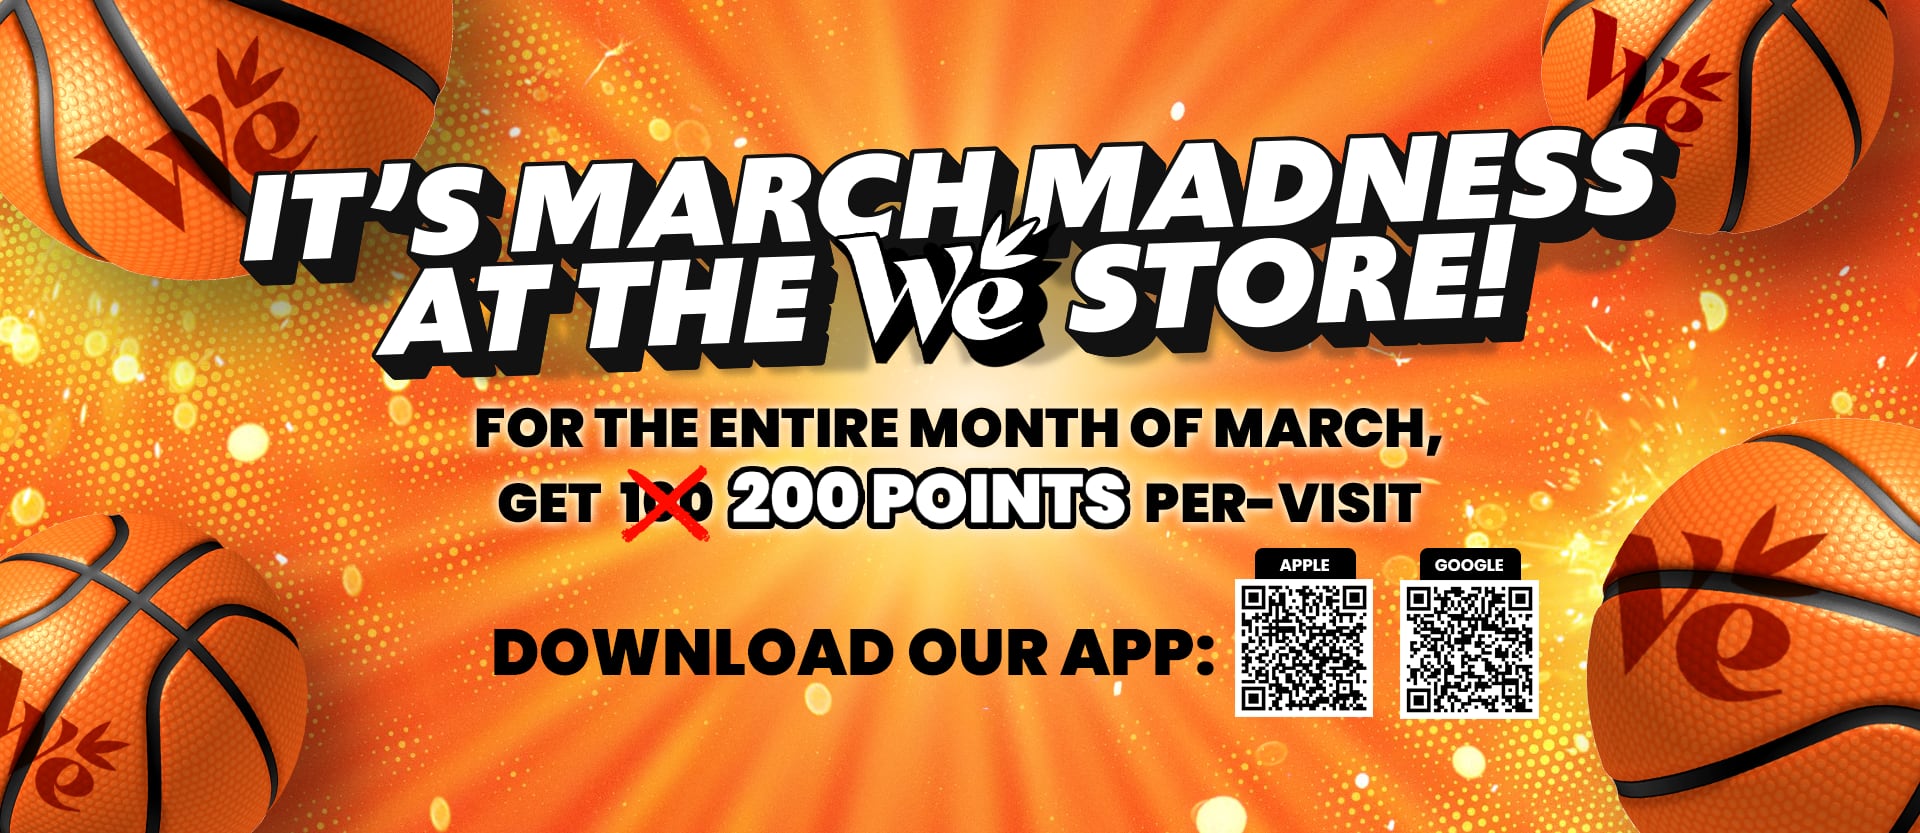 It's March Madness at The WeStore